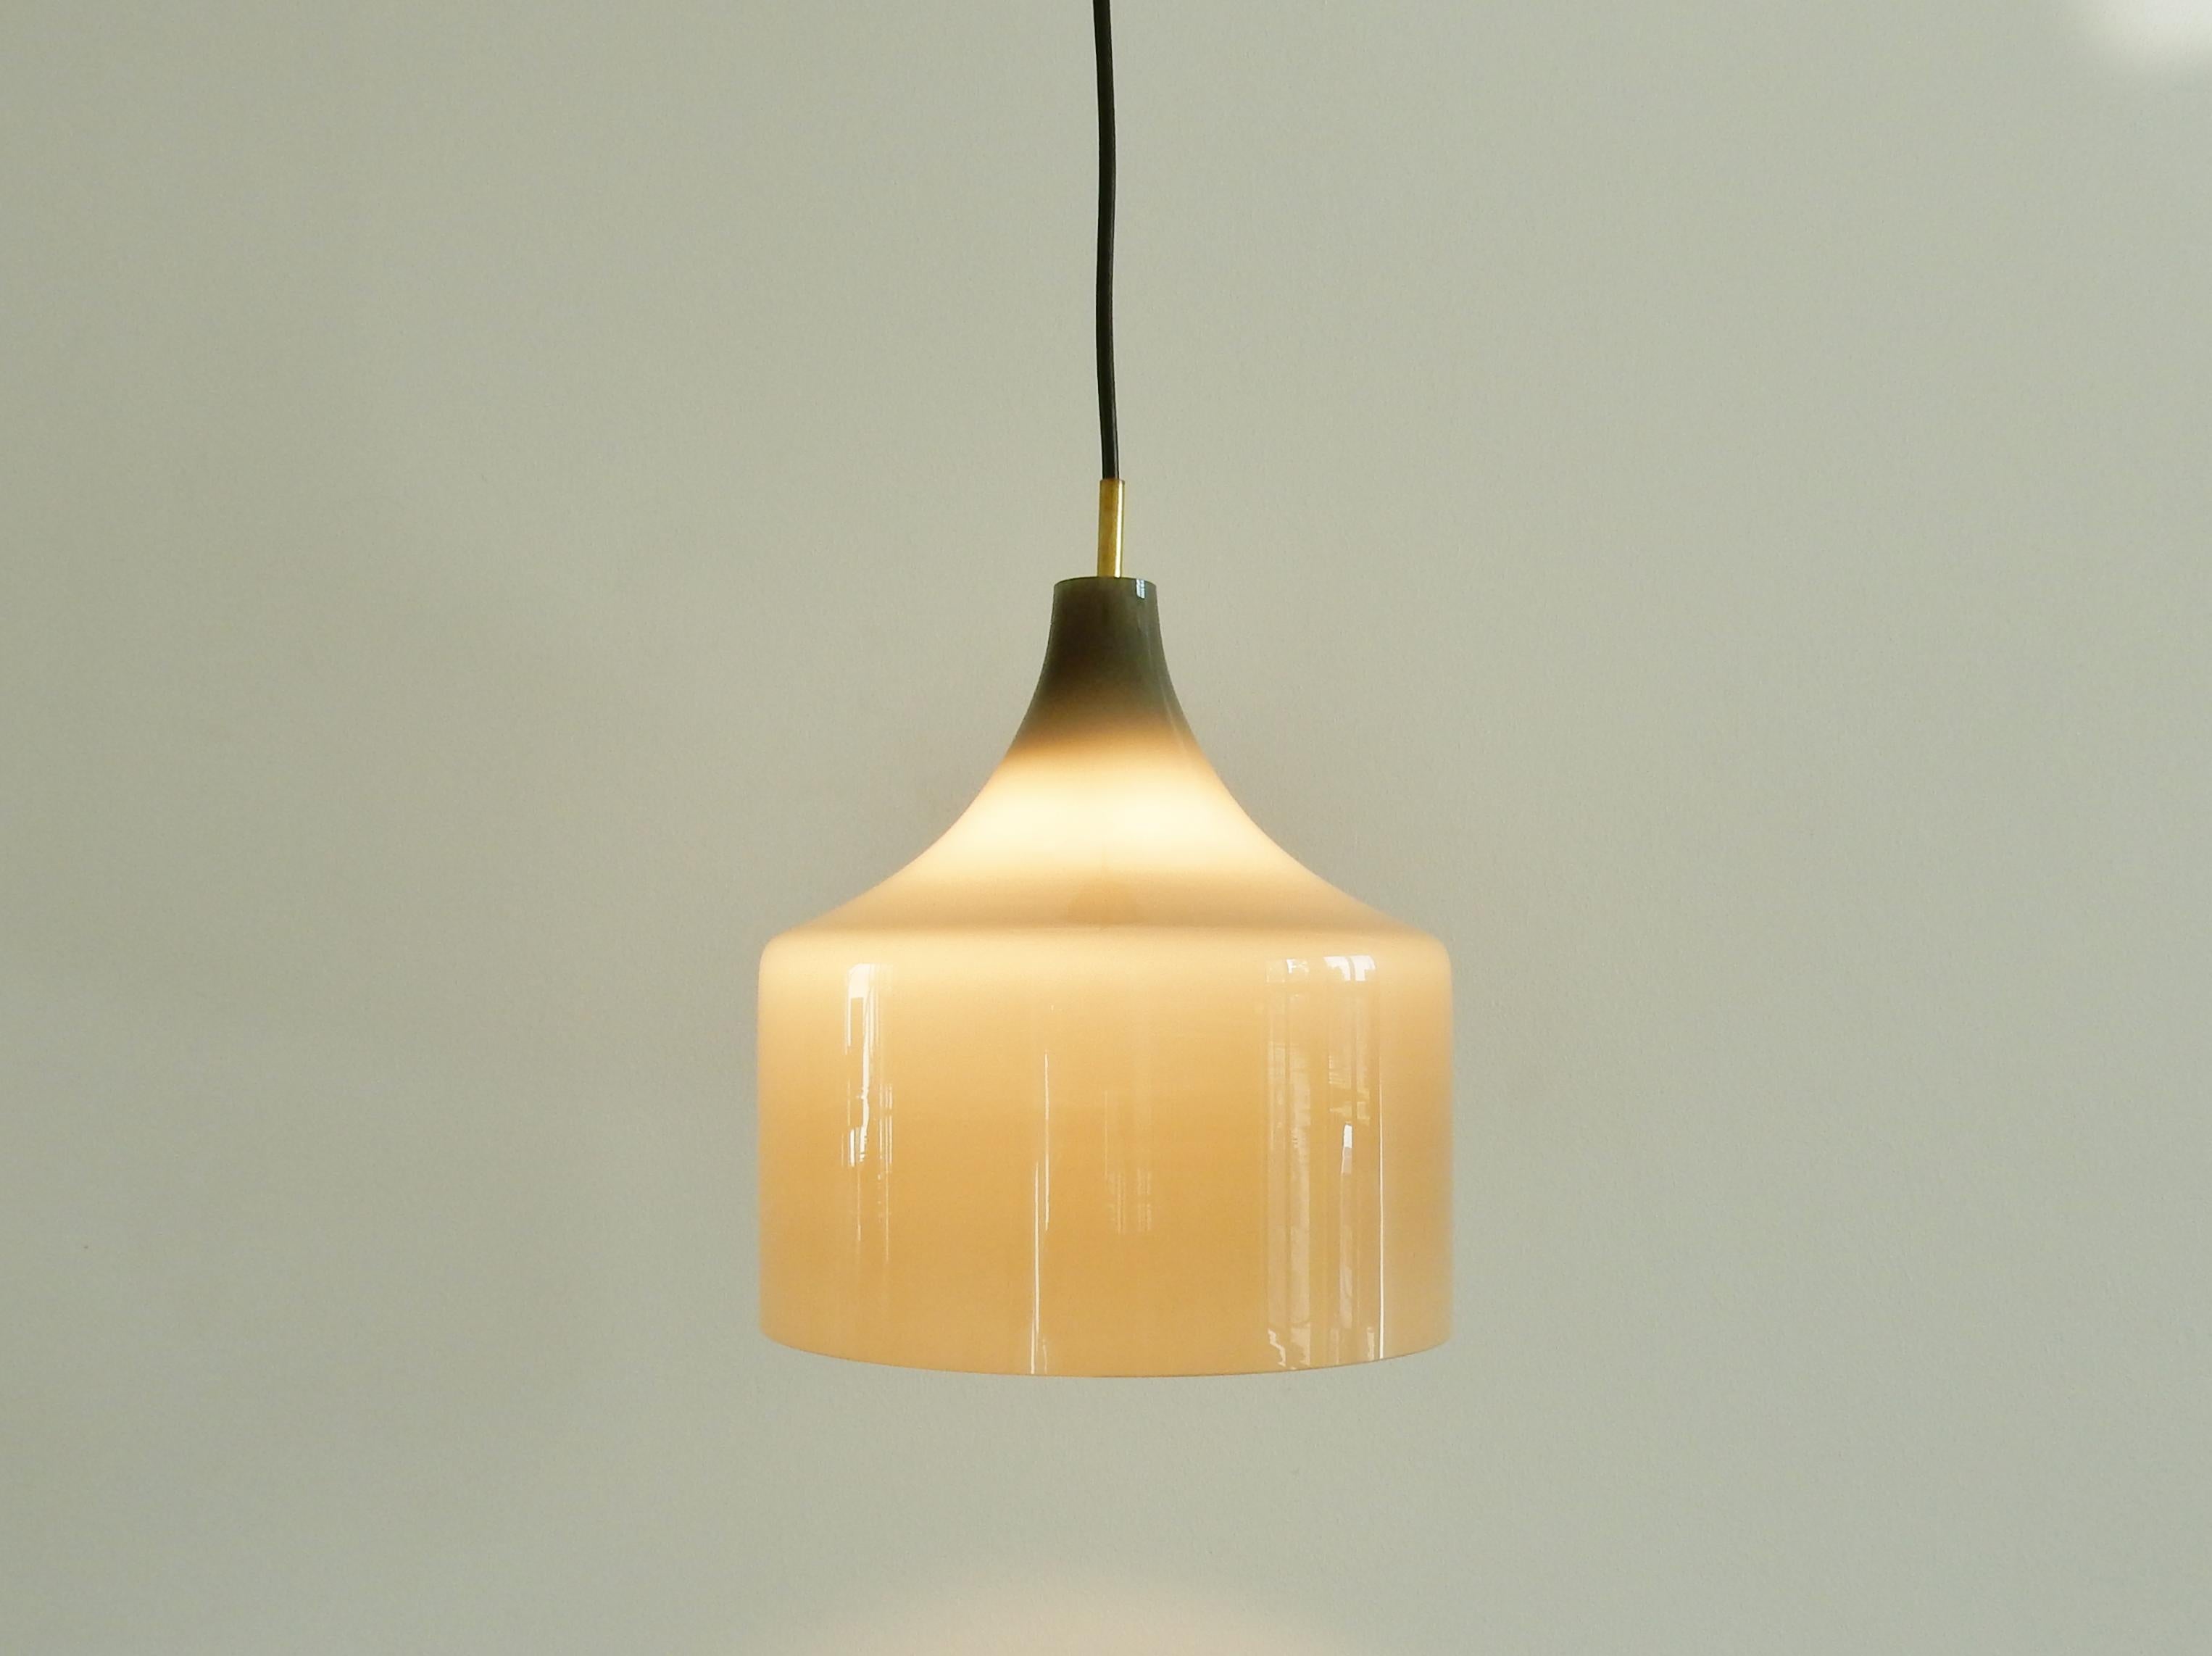 This is a very nice and rare grey opaline glass pendant by Alessandro Pianon for Vistosi. The lamp is in a good condition with a small chip at the inside on the top.

We also have this pendant in white opaline glass available.

Imported by